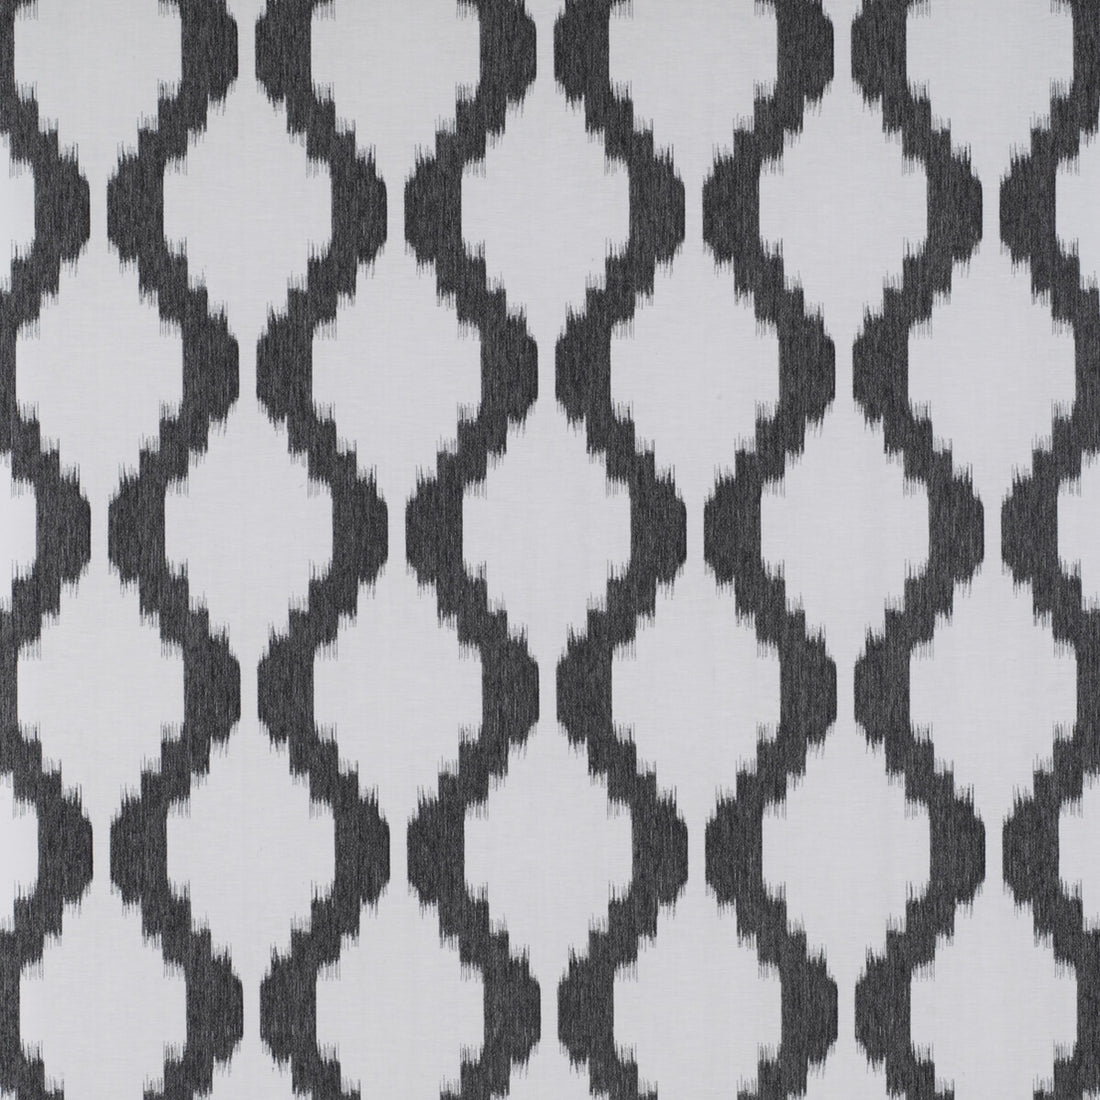 Kf Gyd fabric - pattern GDT5311.008.0 - by Gaston y Daniela in the Tierras collection